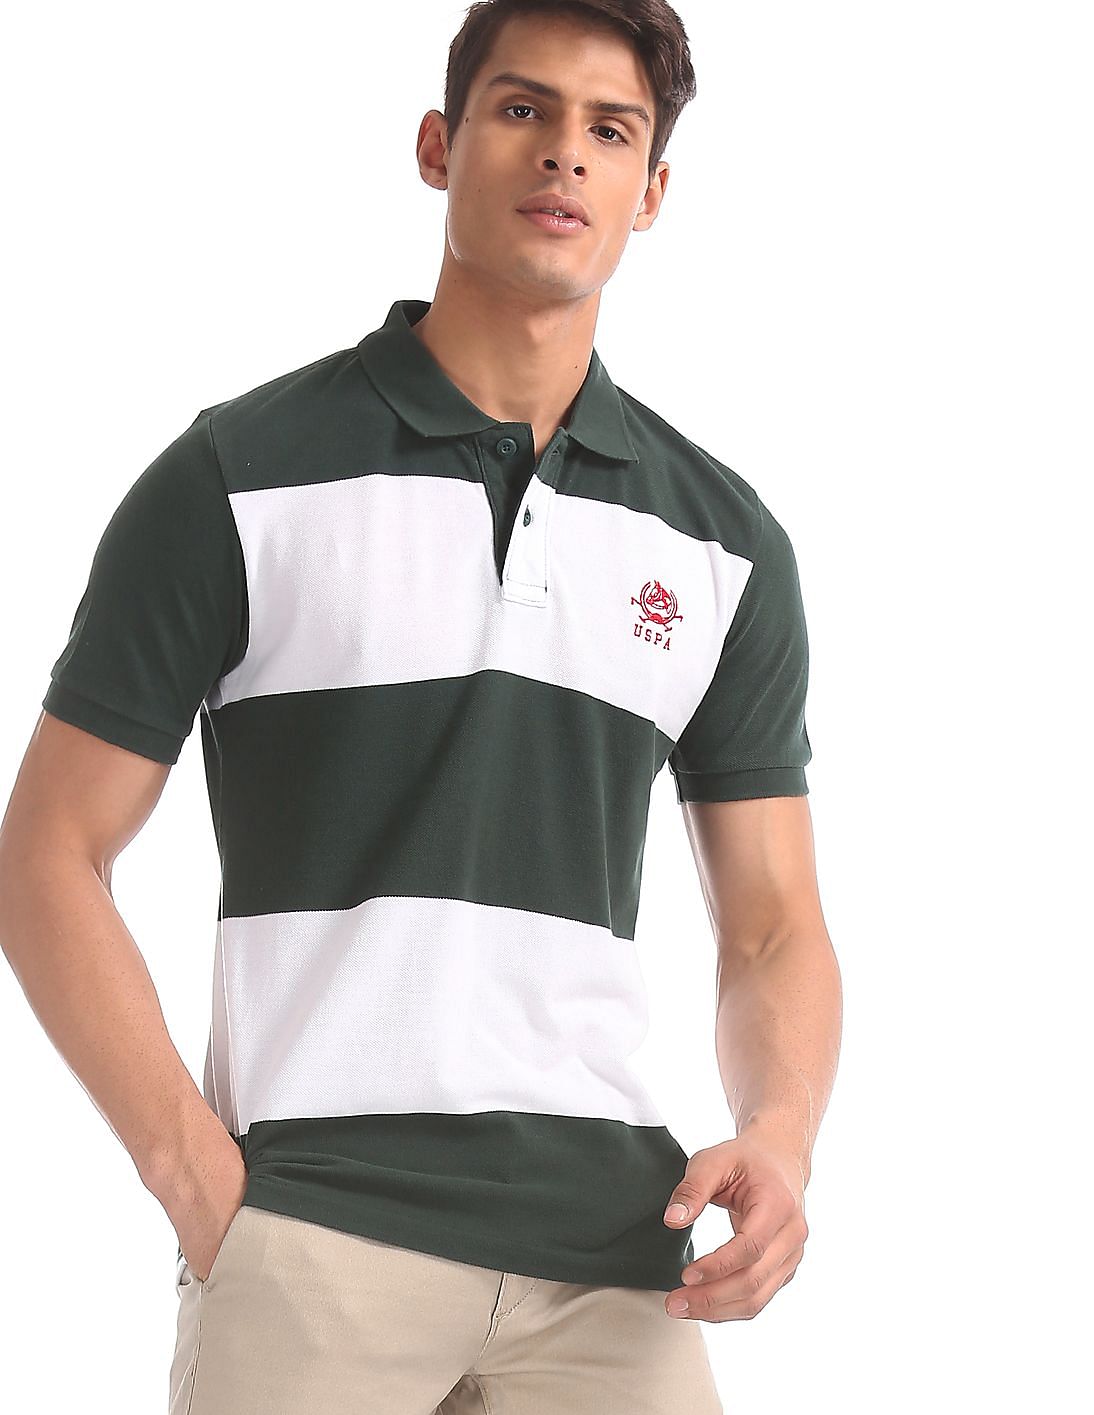 green and white striped polo shirt